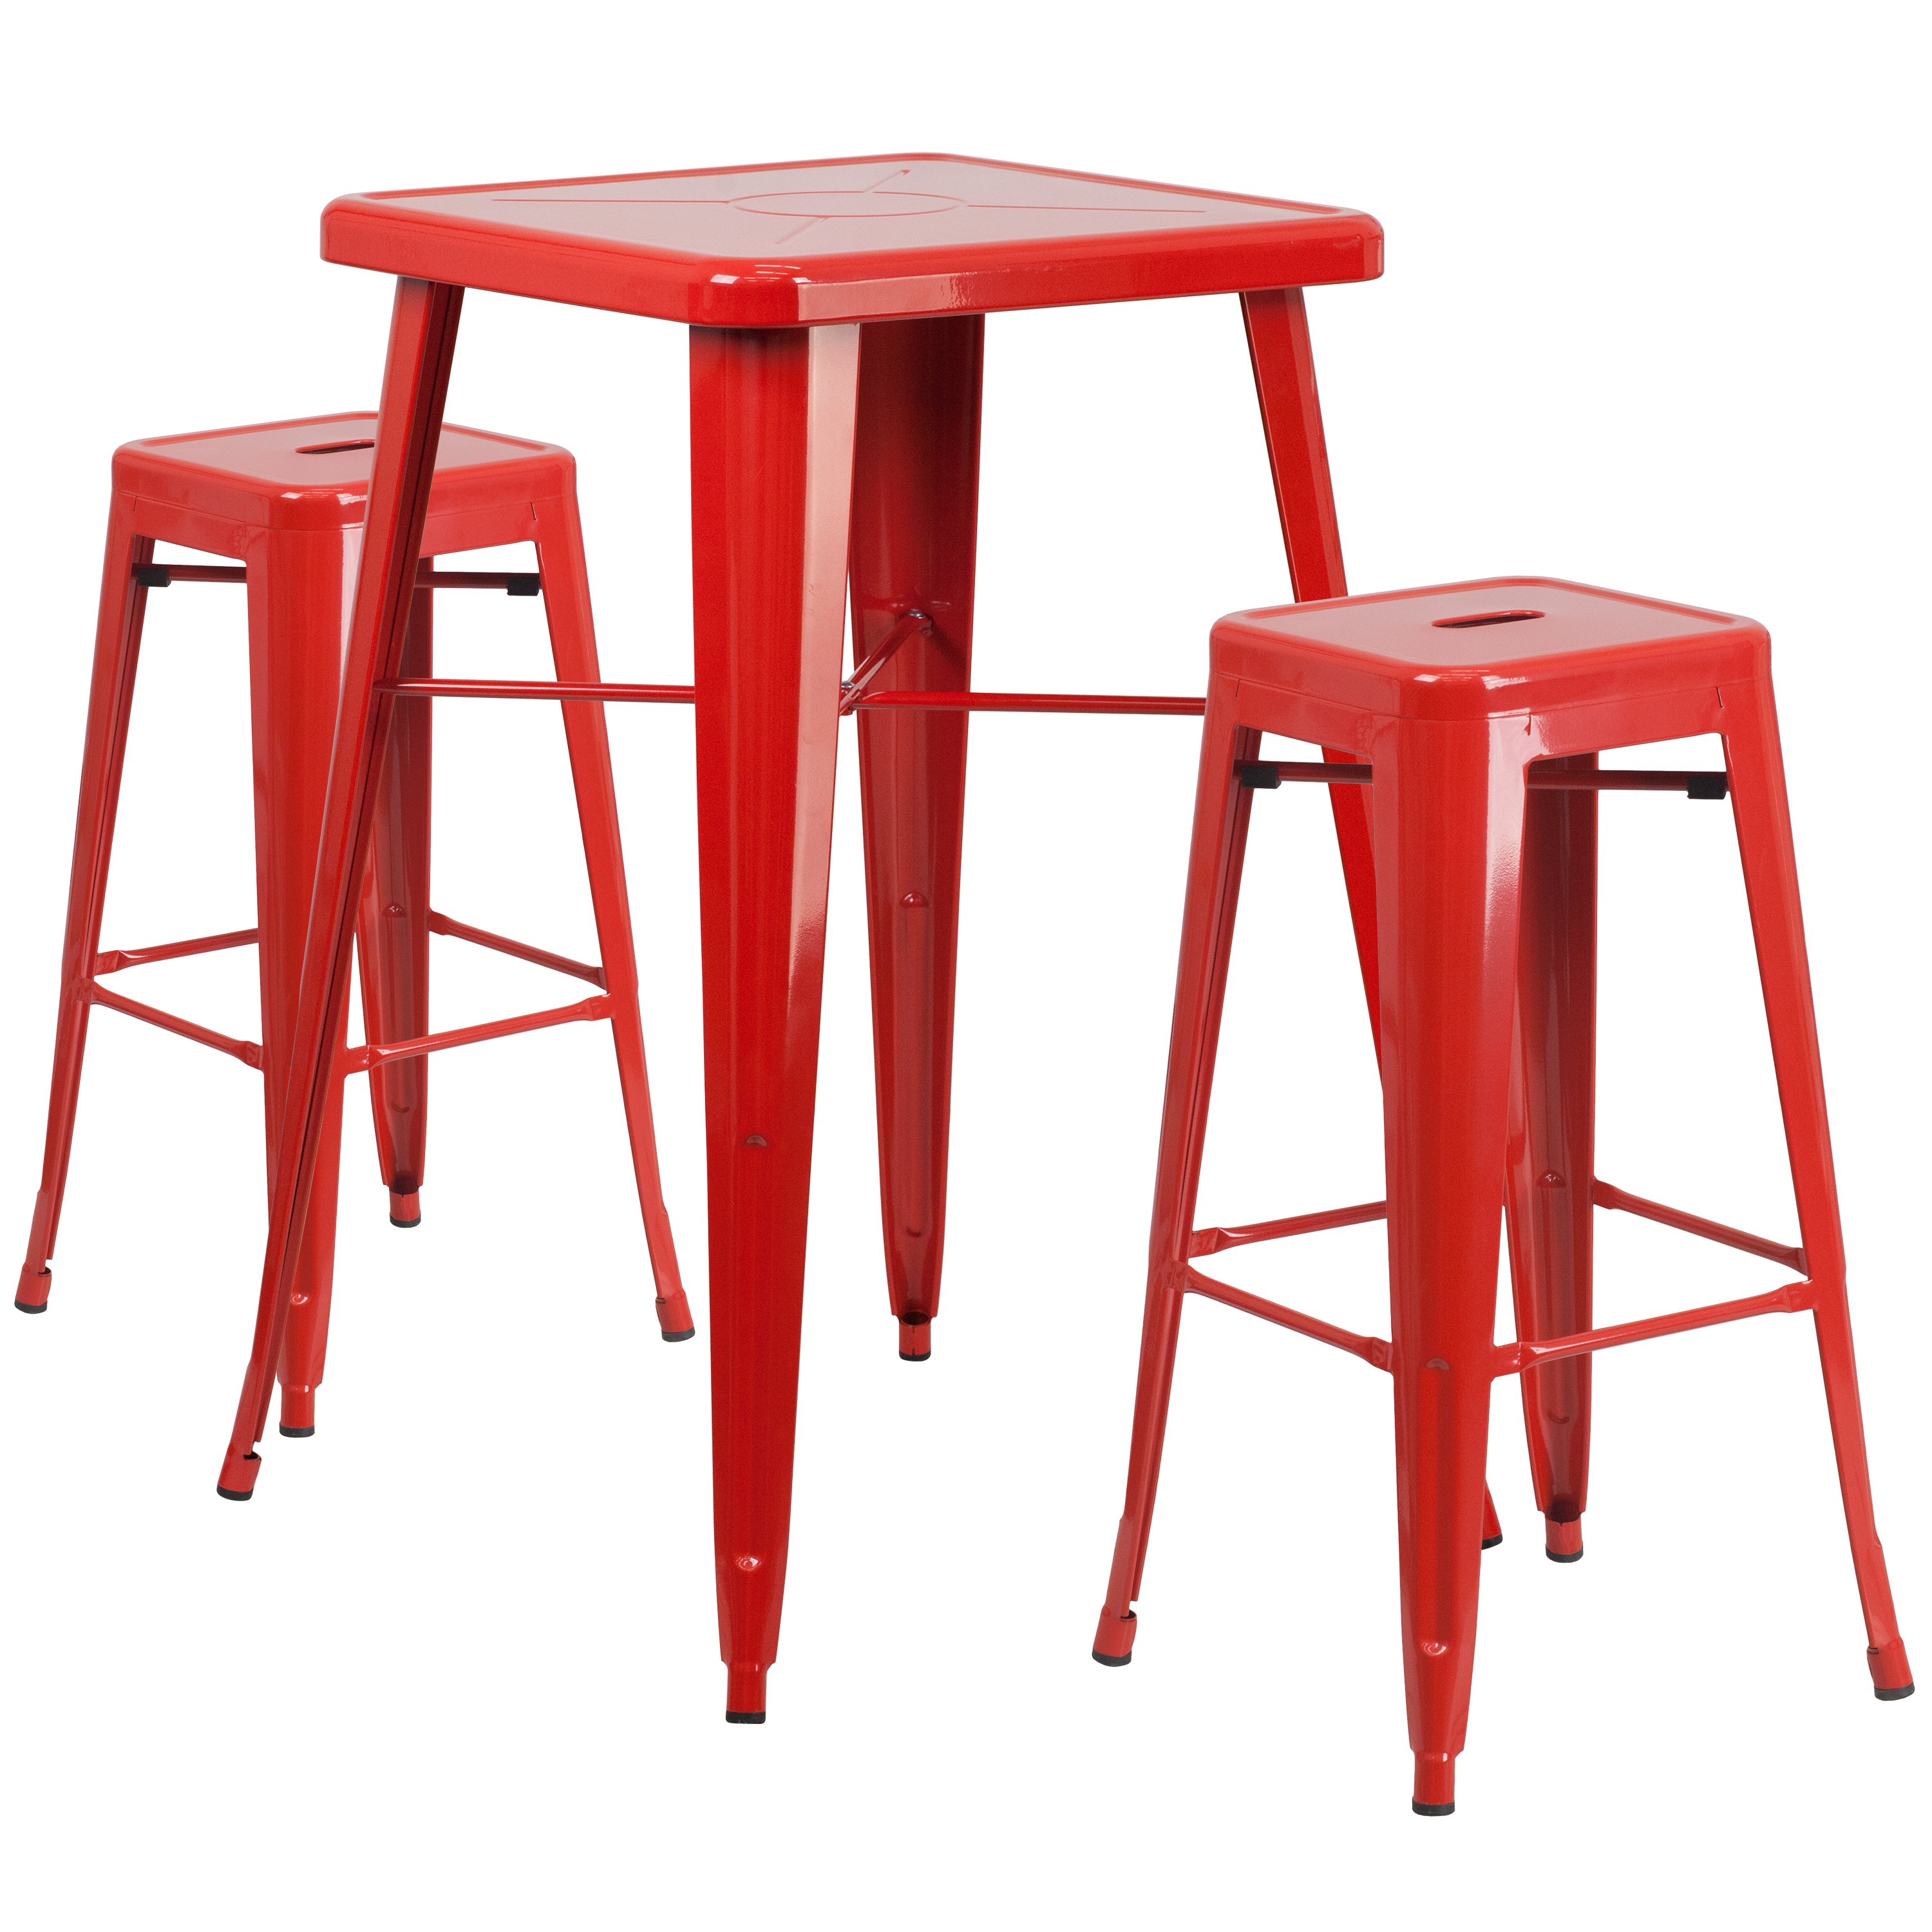 Flash Furniture Commercial Grade 23.75" Square Red Metal Indoor-Outdoor Bar Table Set with 2 Square Seat Backless Stools - image 2 of 5